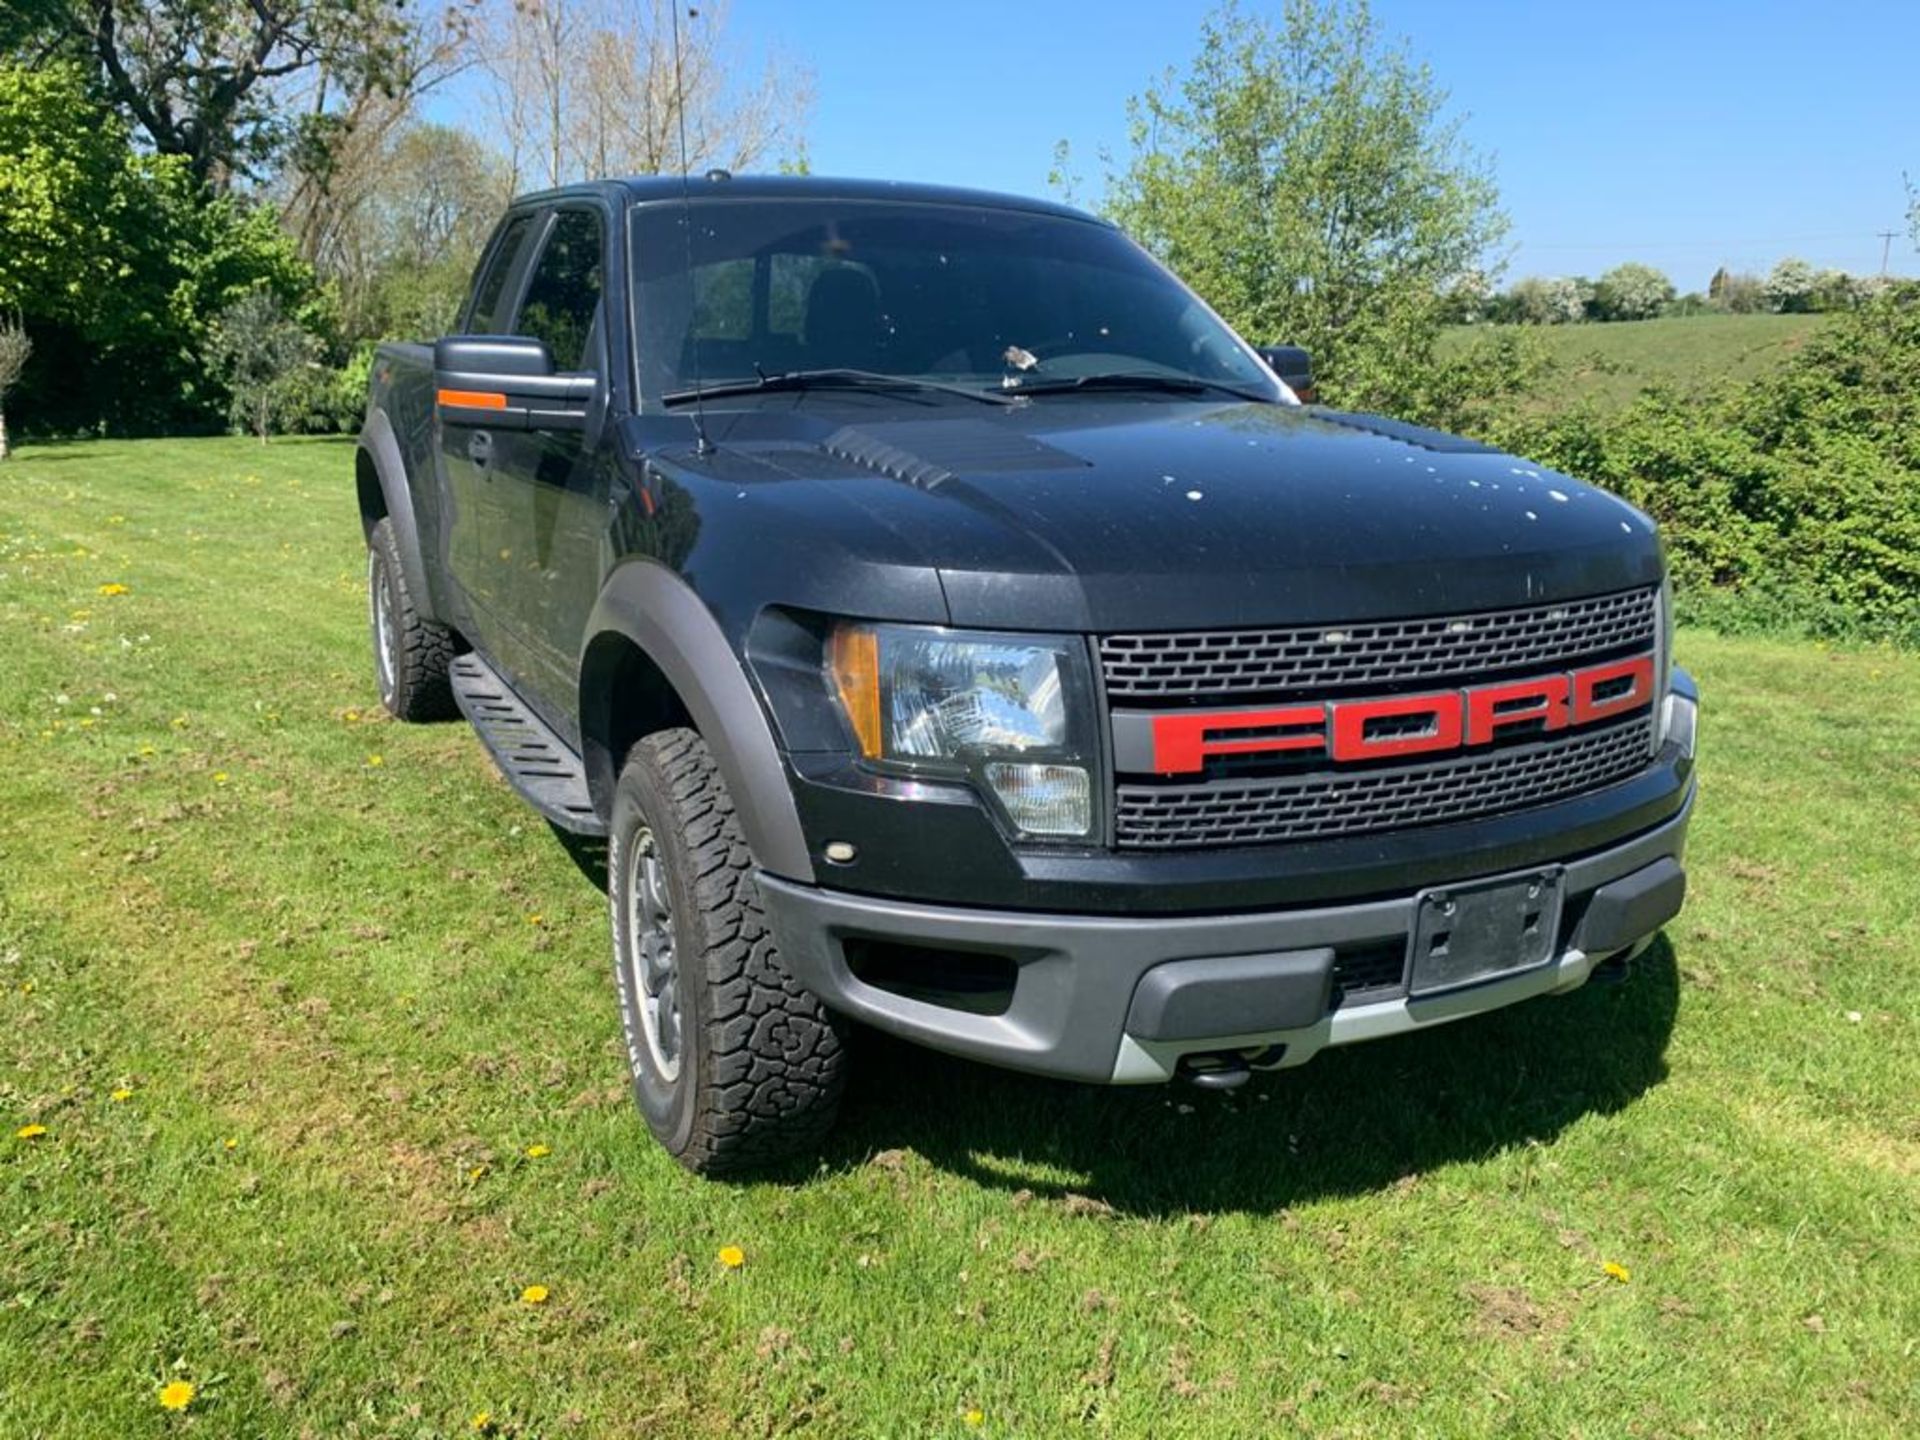 2012 FORD F-150 RAPTOR - 65,000 MILES, LOTS OF UPGRADED PARTS, READY IN UK WITH NOVA APPLICATION - Image 6 of 18